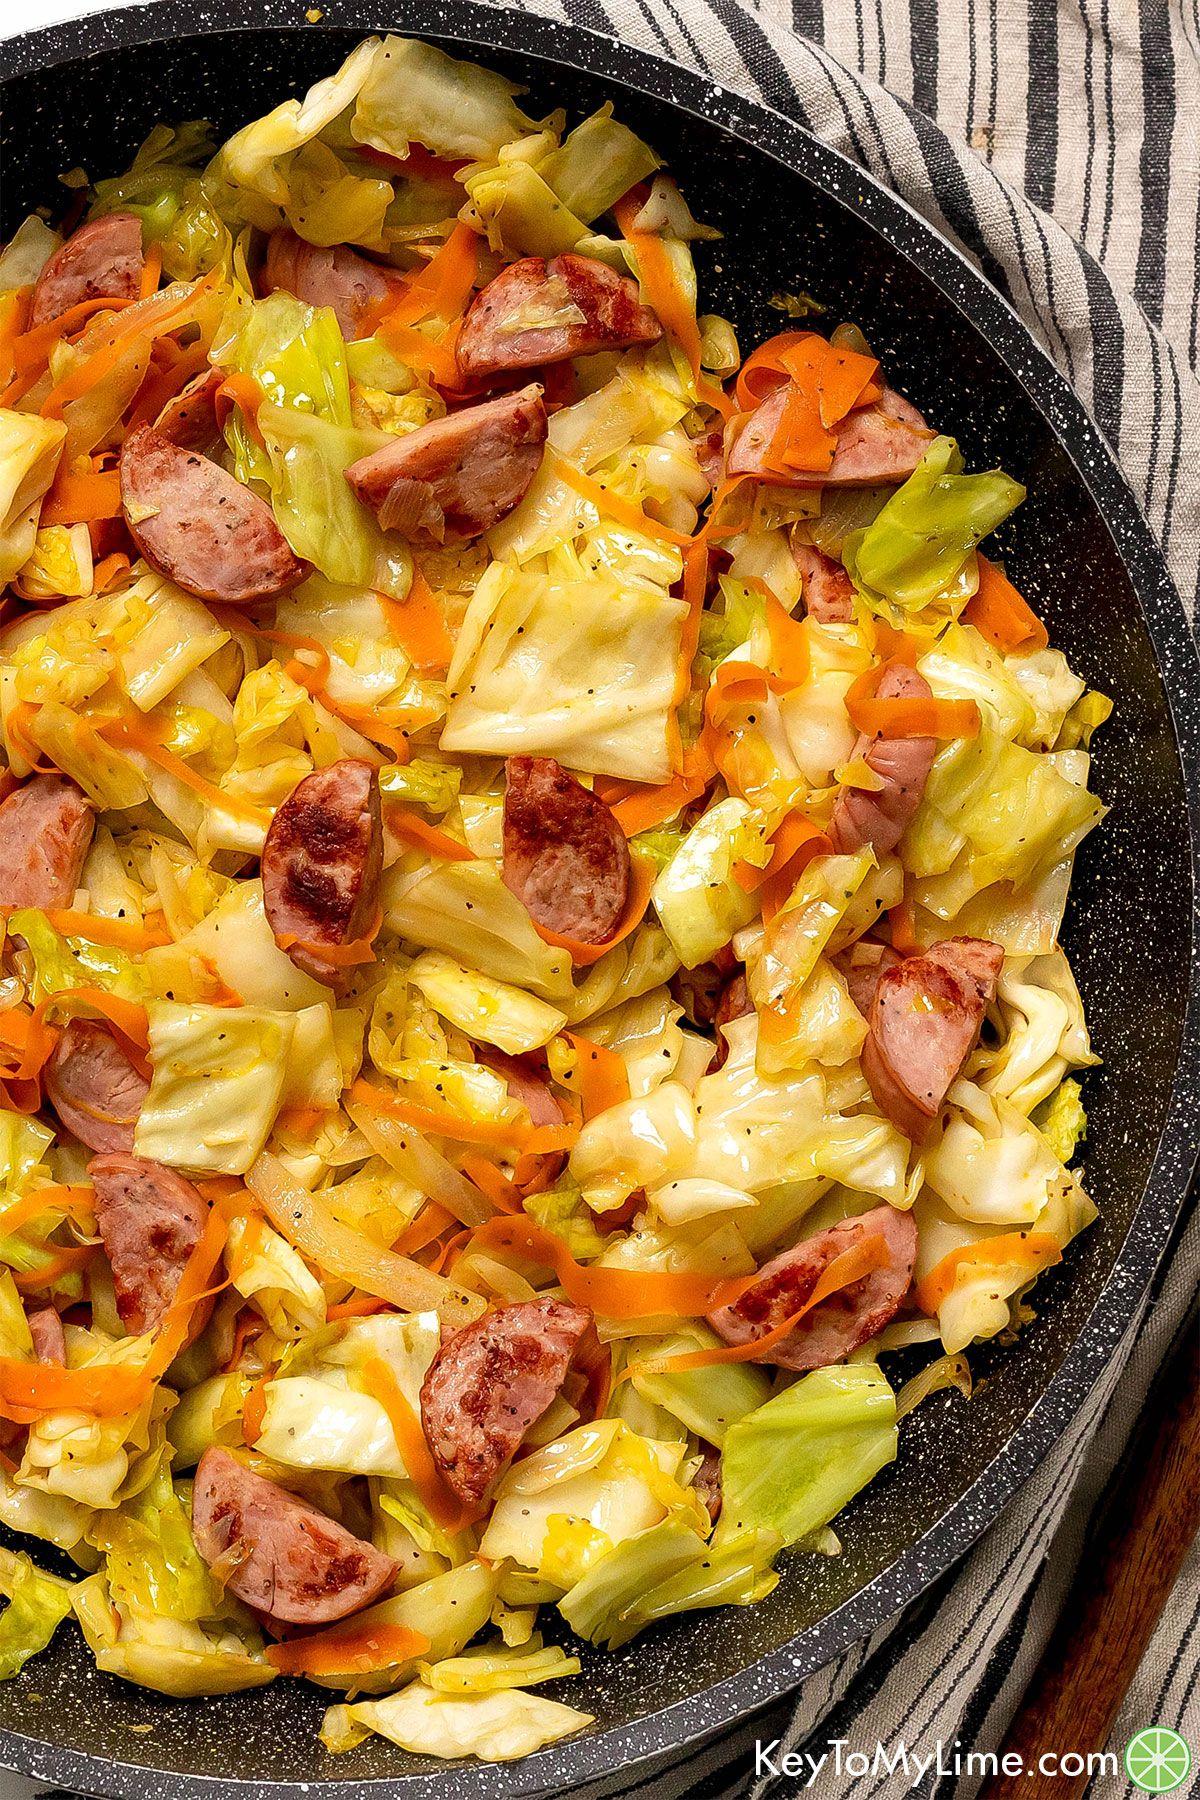 An overhead image of fried cabbage and sausage in a skillet over a napkin.